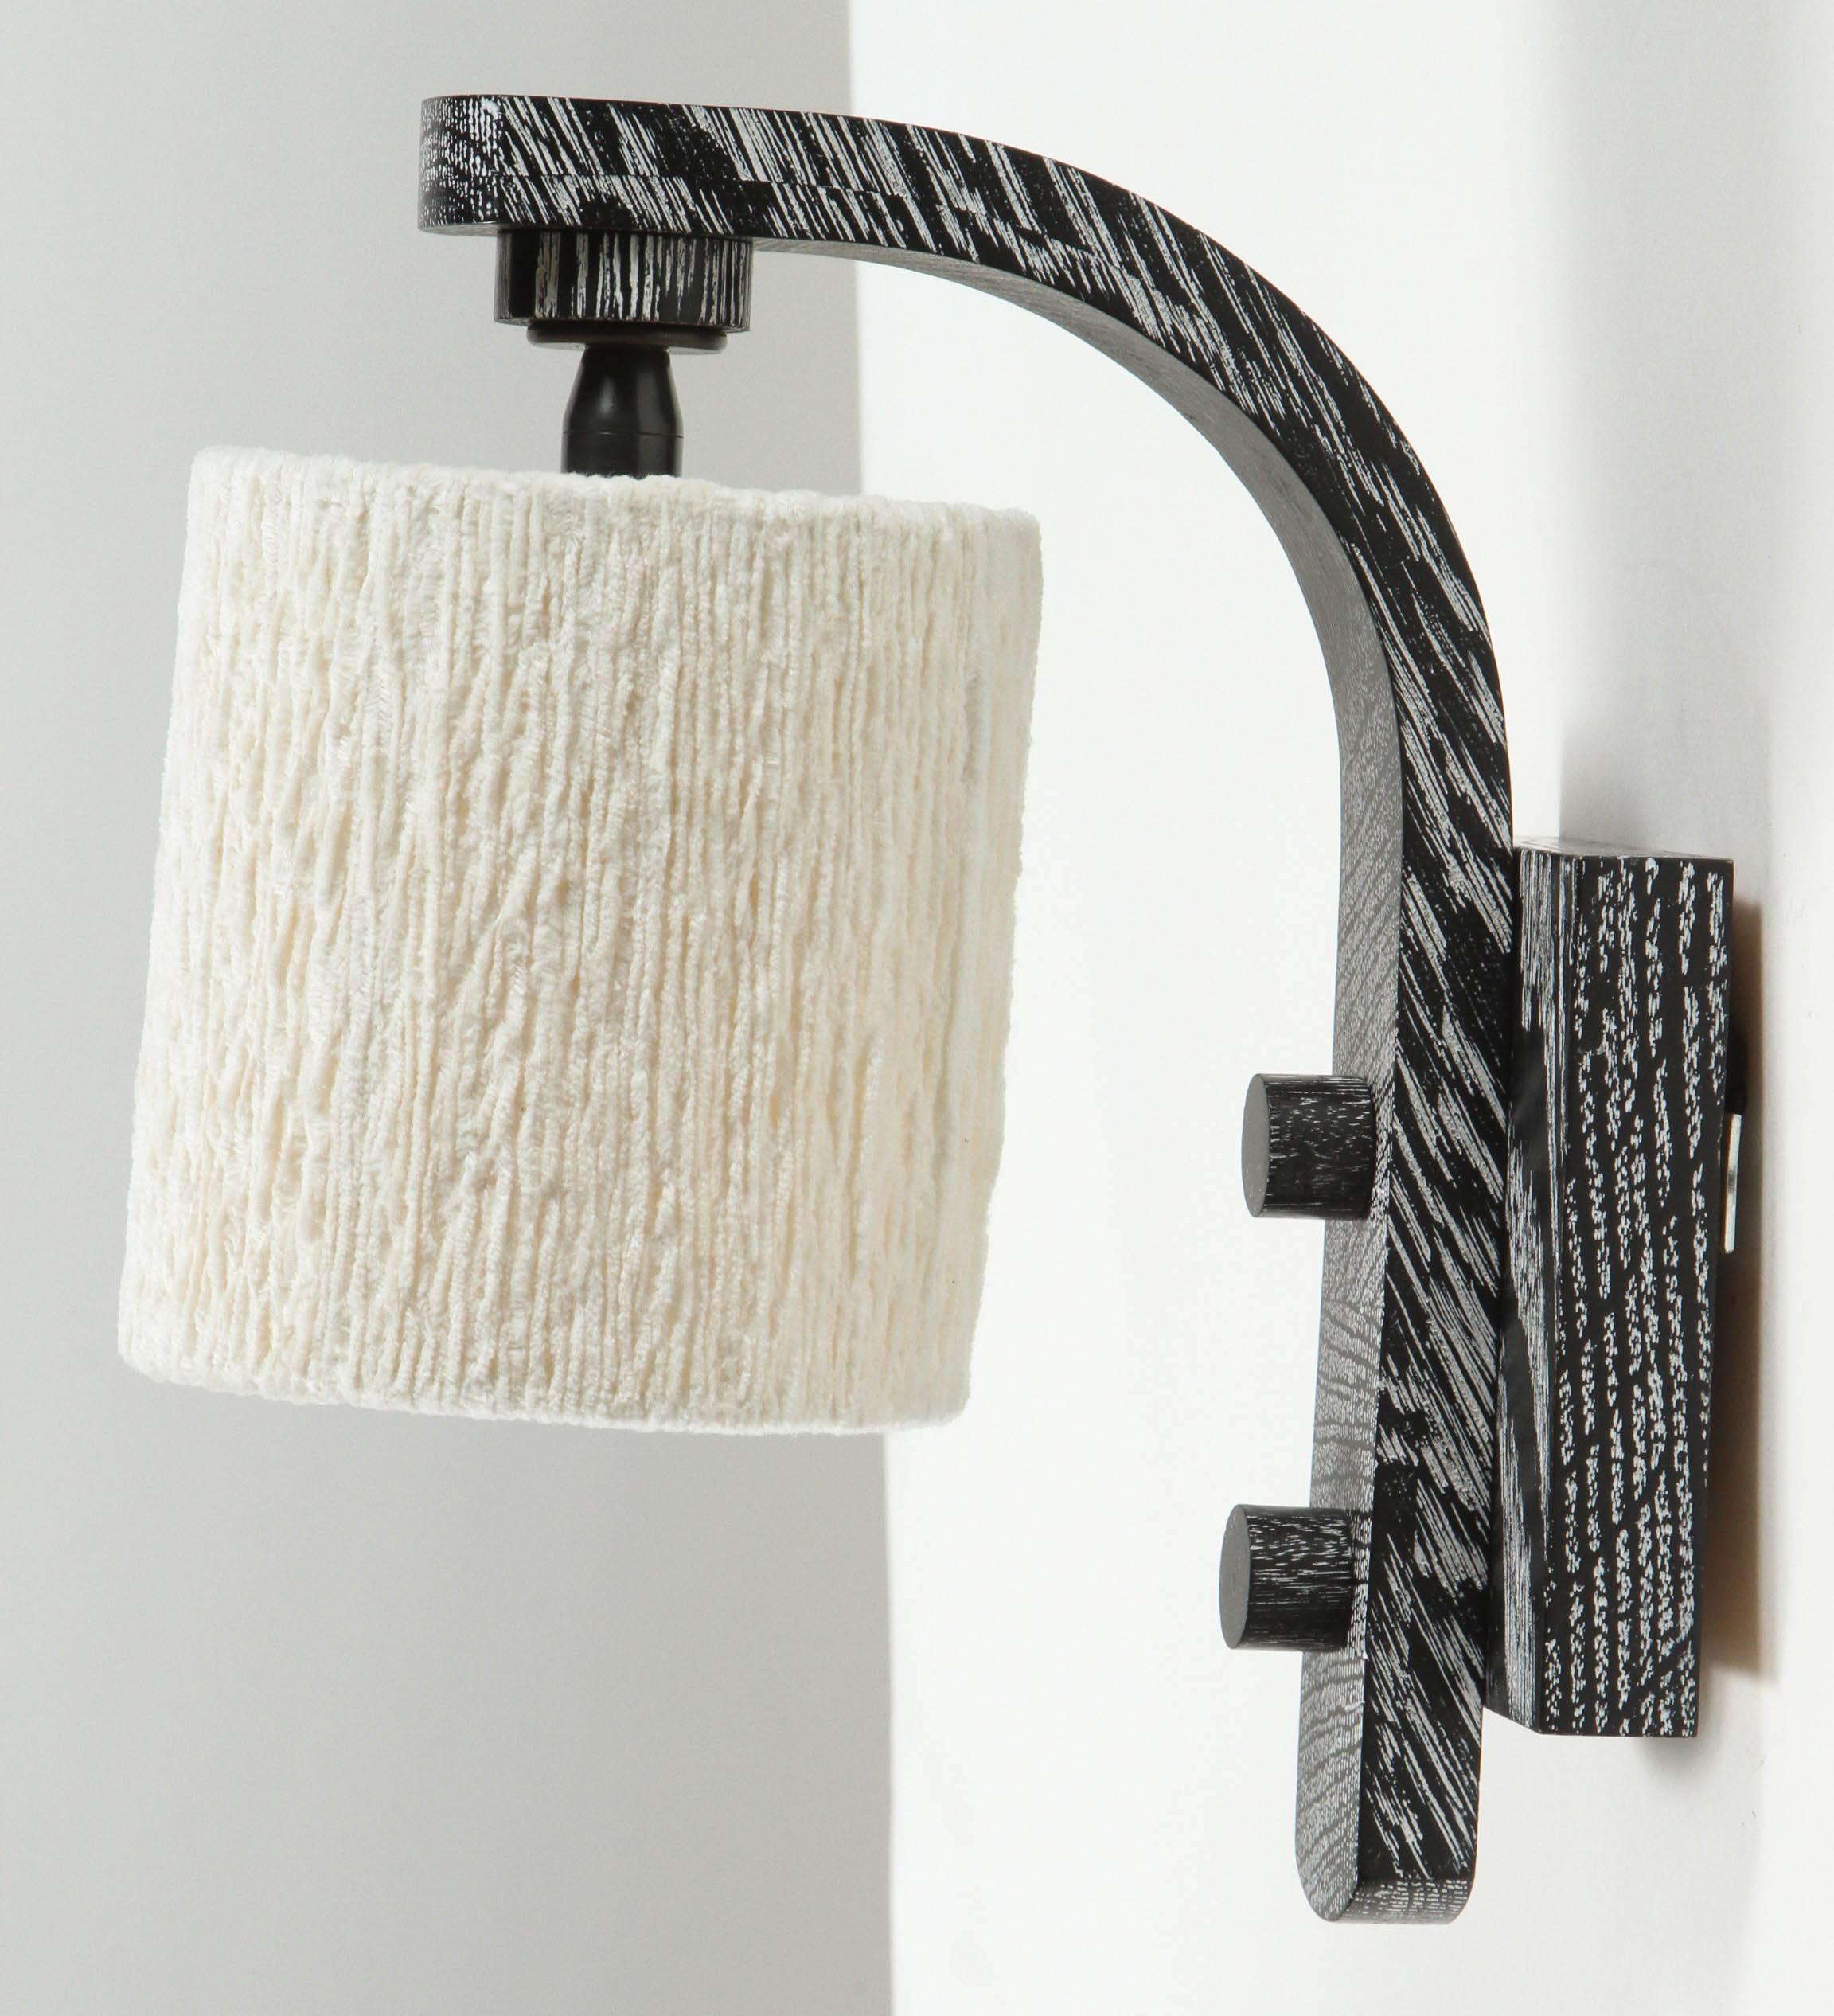 Organic Modern Paul Marra Oak Sconce with Cotton Chenille Shade